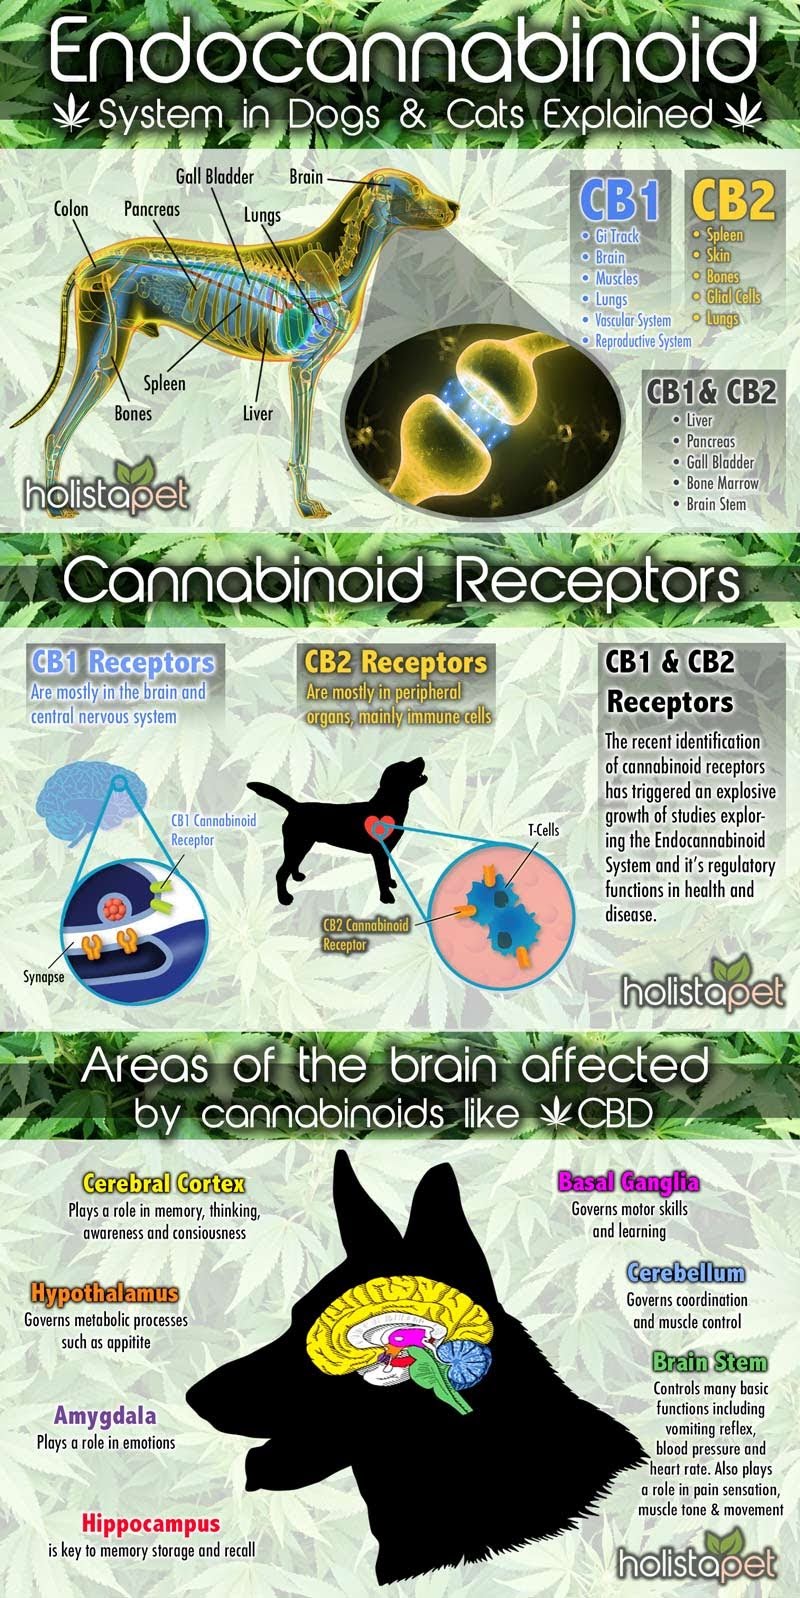 Endocannabinoid System in Dogs & Cats Explained #infographic